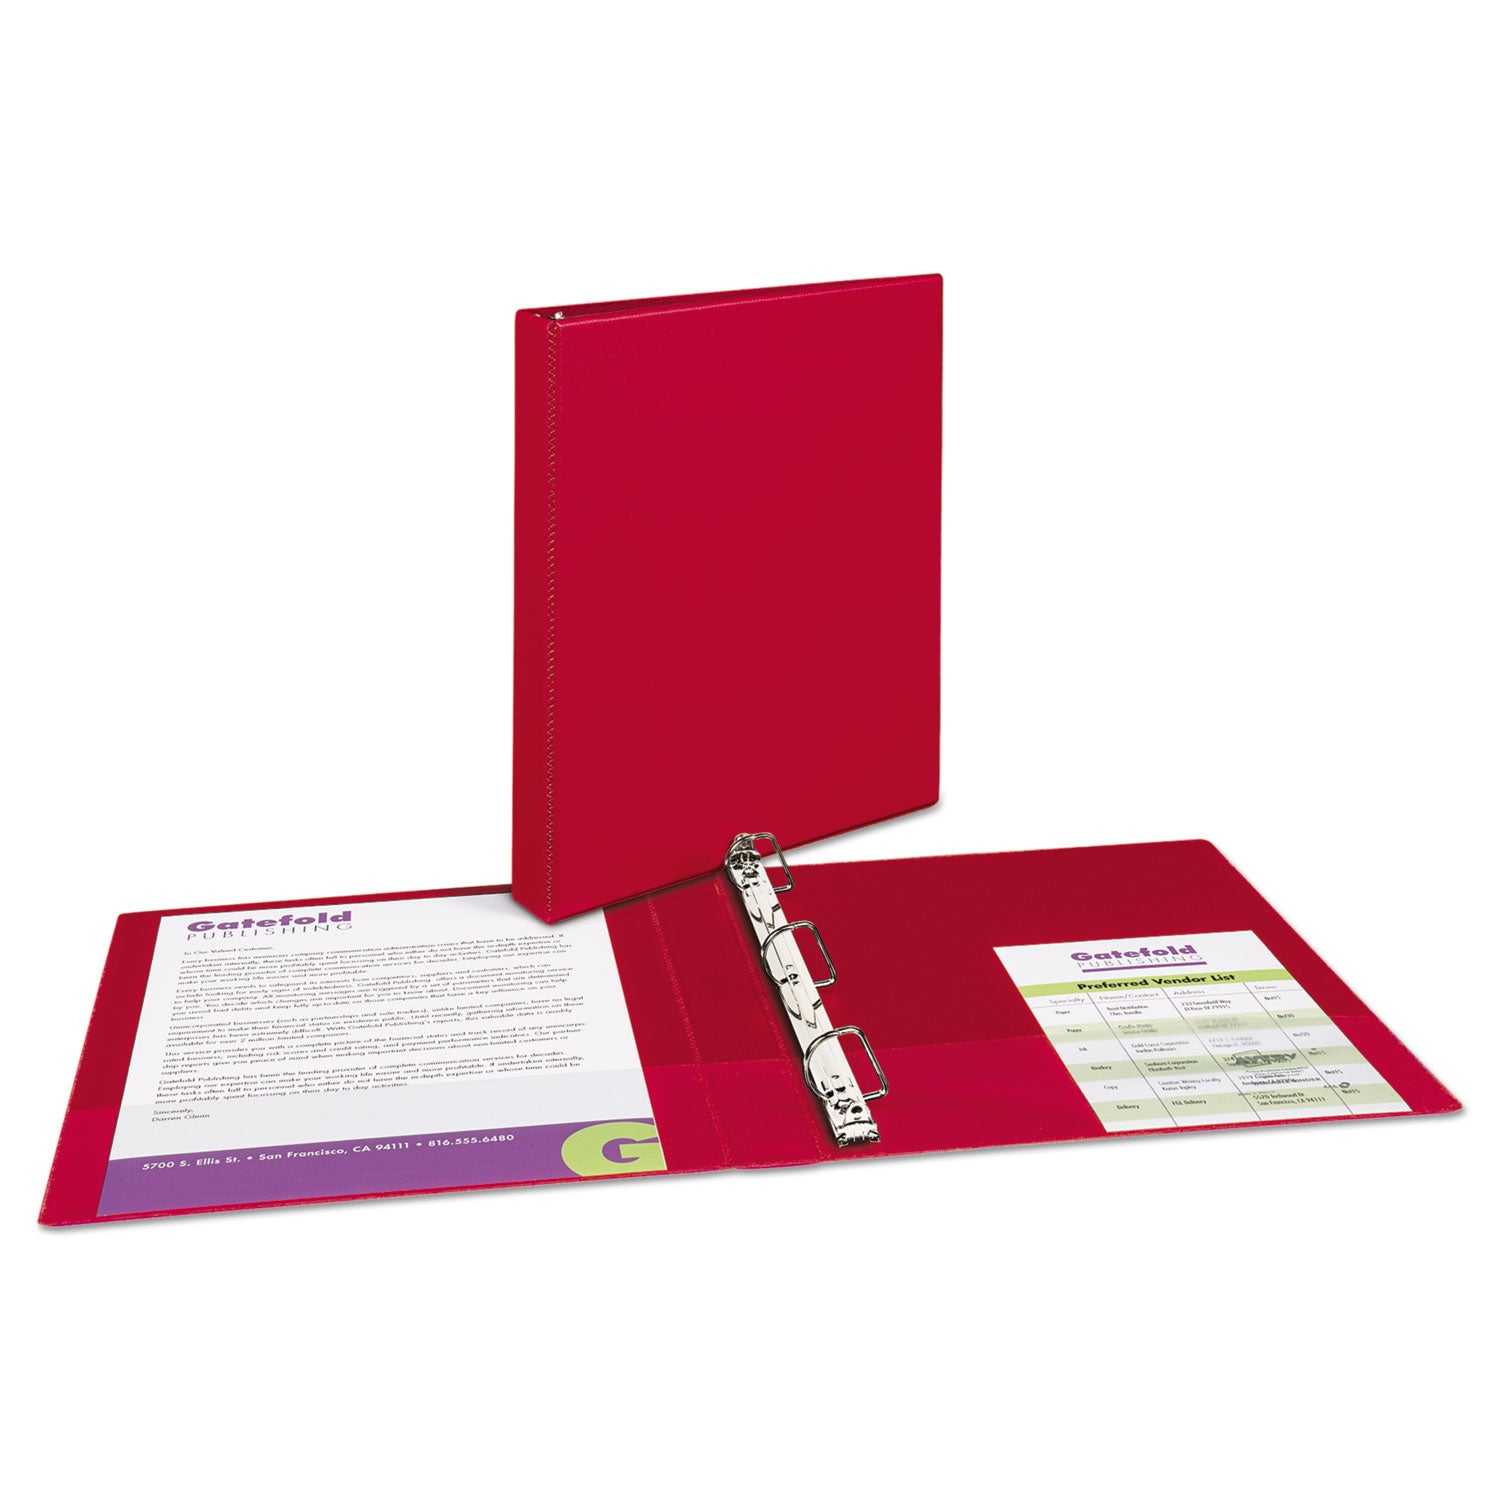 Durable Non-View Binder with DuraHinge and Slant Rings, 3 Rings, 1" Capacity, 11 x 8.5, Red - 